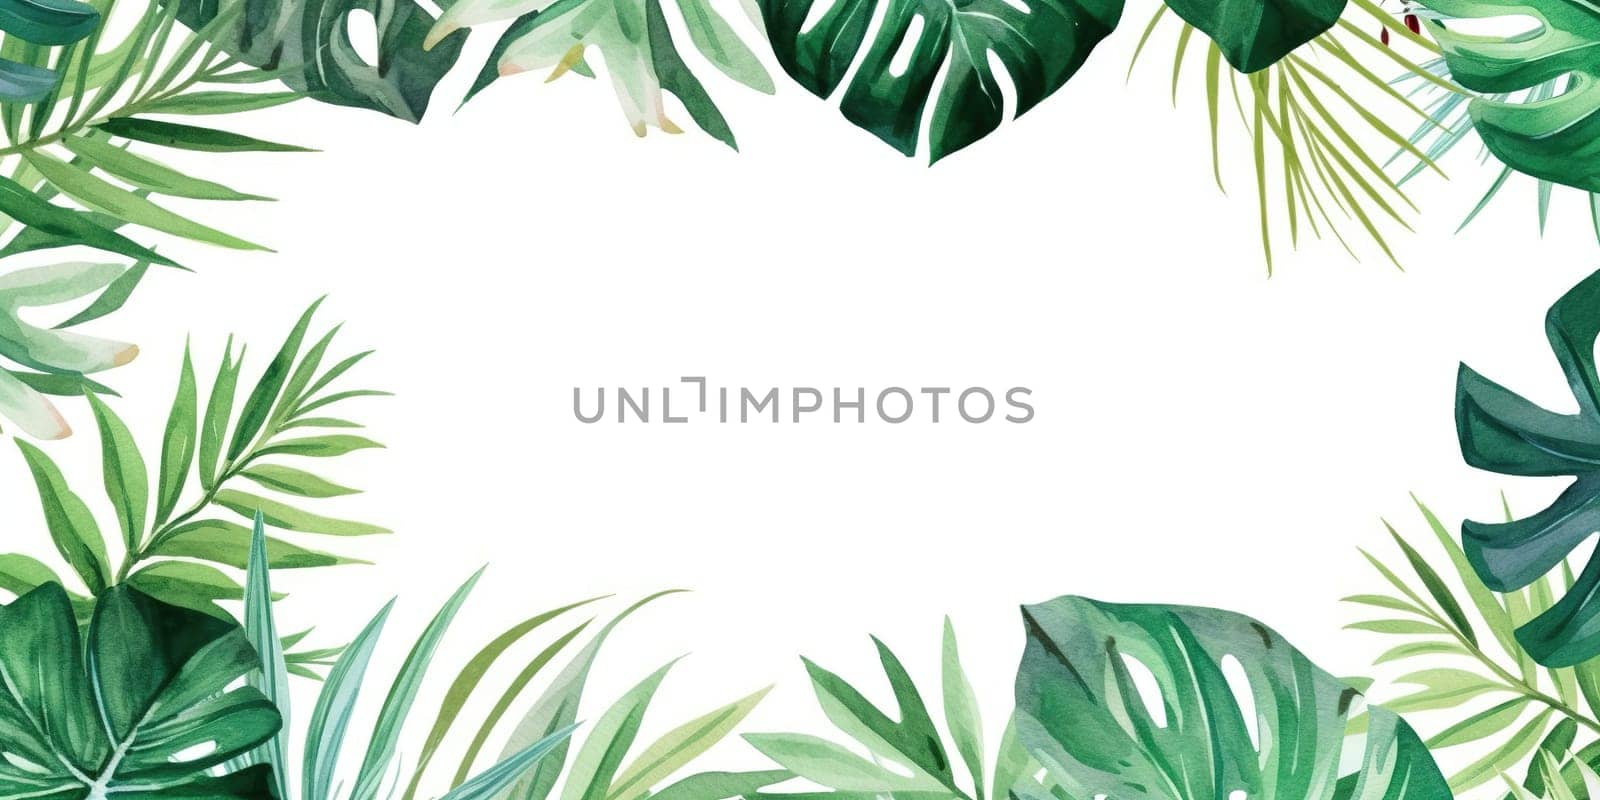 Watercolor Illustration Of Tropical Green Leaves As Frame For Your Design by GekaSkr